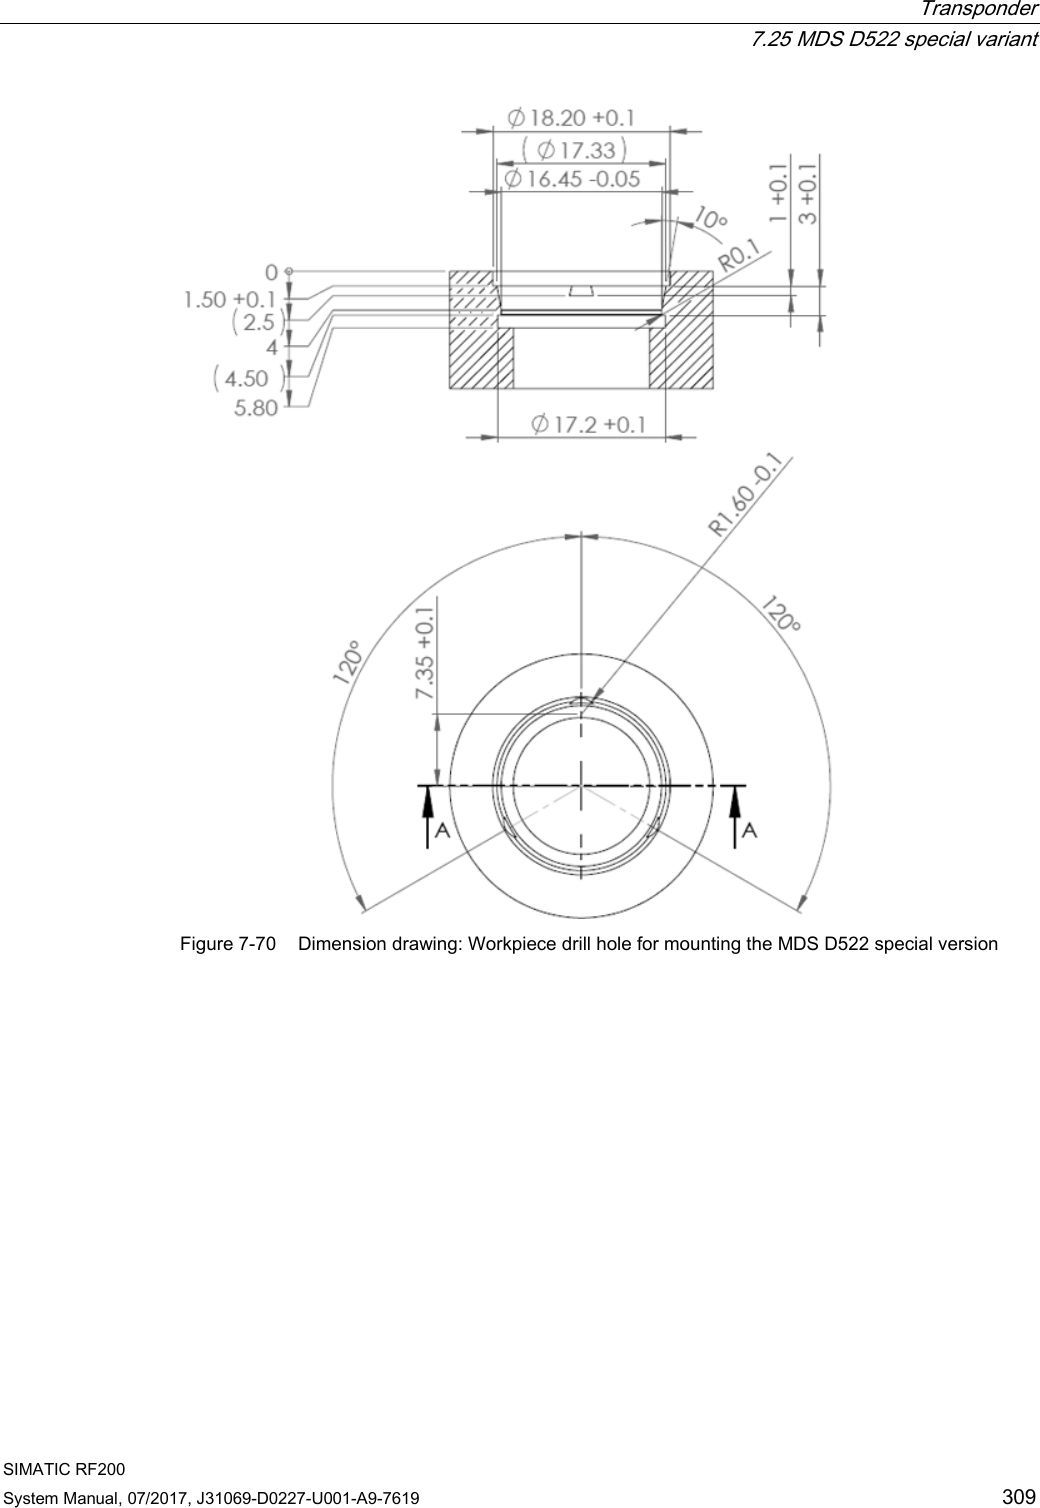  Transponder  7.25 MDS D522 special variant SIMATIC RF200 System Manual, 07/2017, J31069-D0227-U001-A9-7619 309  Figure 7-70 Dimension drawing: Workpiece drill hole for mounting the MDS D522 special version 